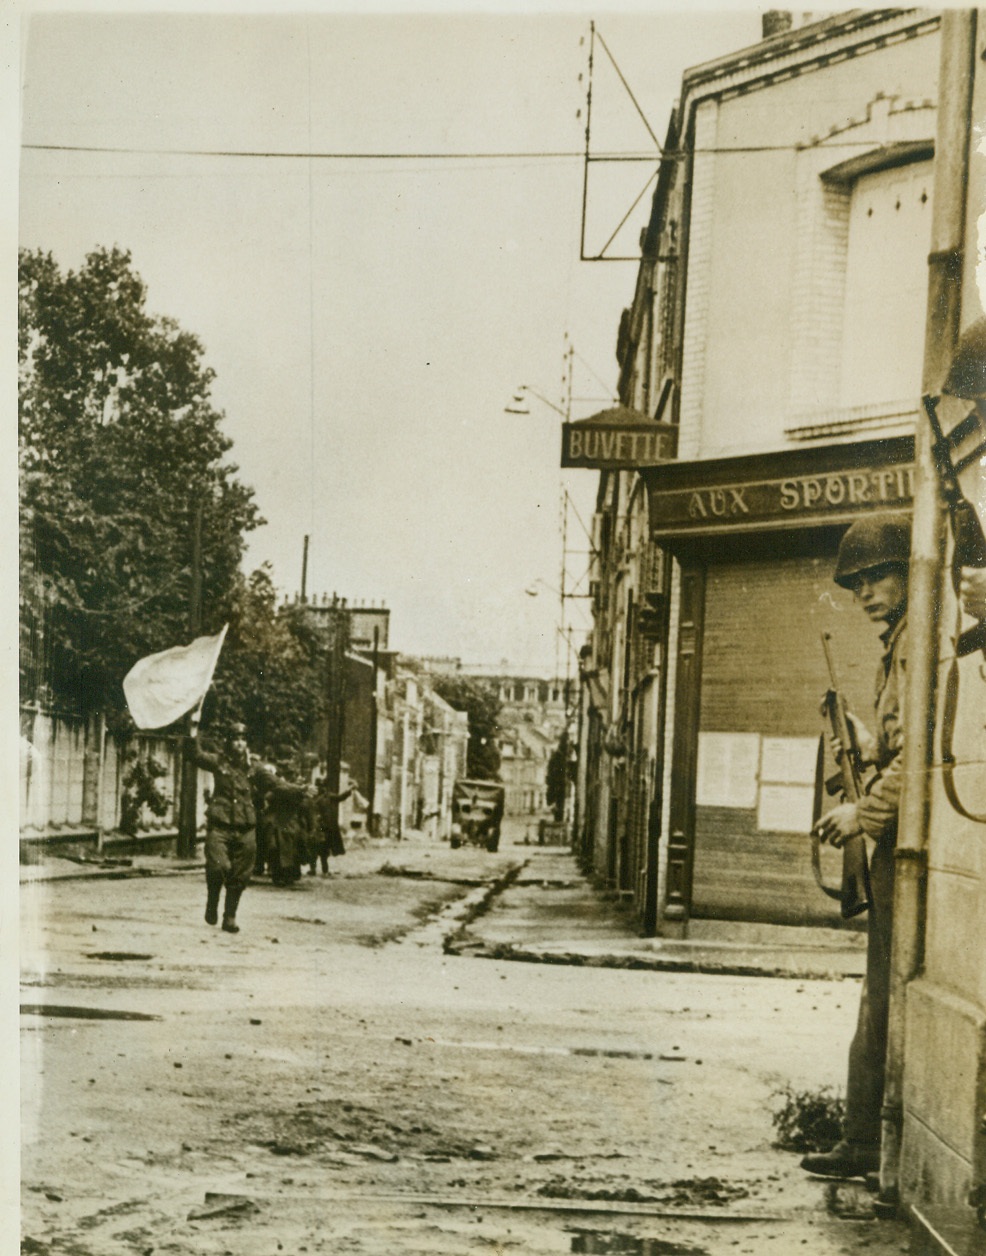 Nazis Show Their Colors, 7/1/1944. France—Defenders of a pillbox guarding a street in Cherbourg, German soldiers surrender, waving a white flag, after being knocked out of their position by Allied tank fire. Soldiers in doorway of building at right keep guns on the ready on the look out for any escape moves. Nazis carry their own wounded as they move dejectedly in defeat with their destination prison compounds.  Credit: ACME;